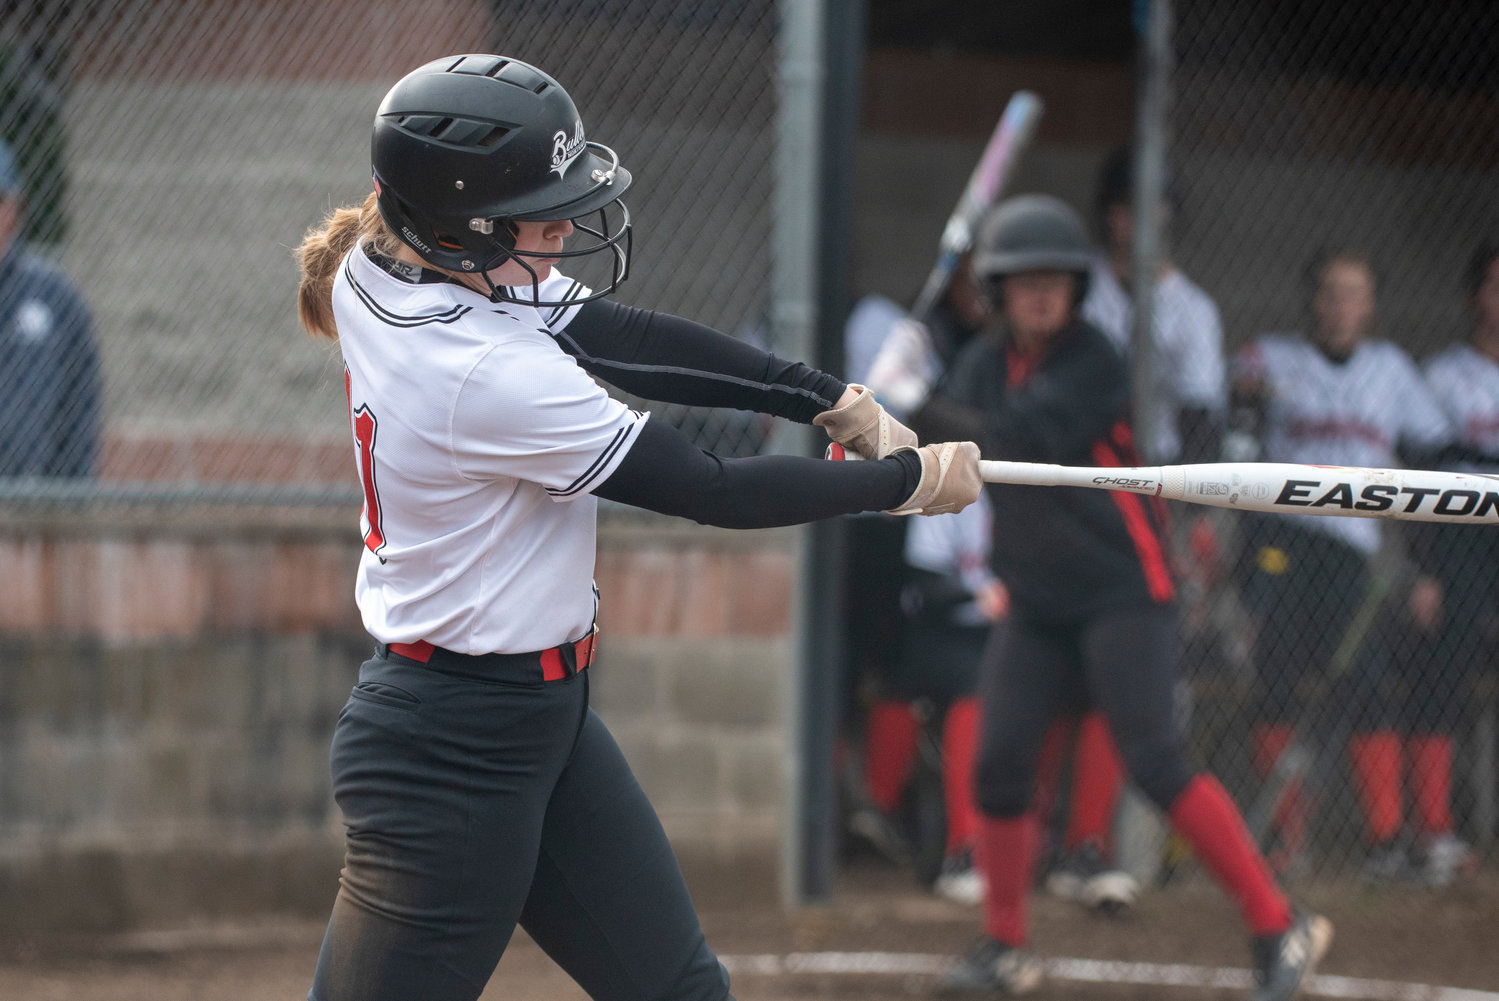 Mossyrock's Hailey Brooks connects on a Rainier pitch during a home game on March 18.